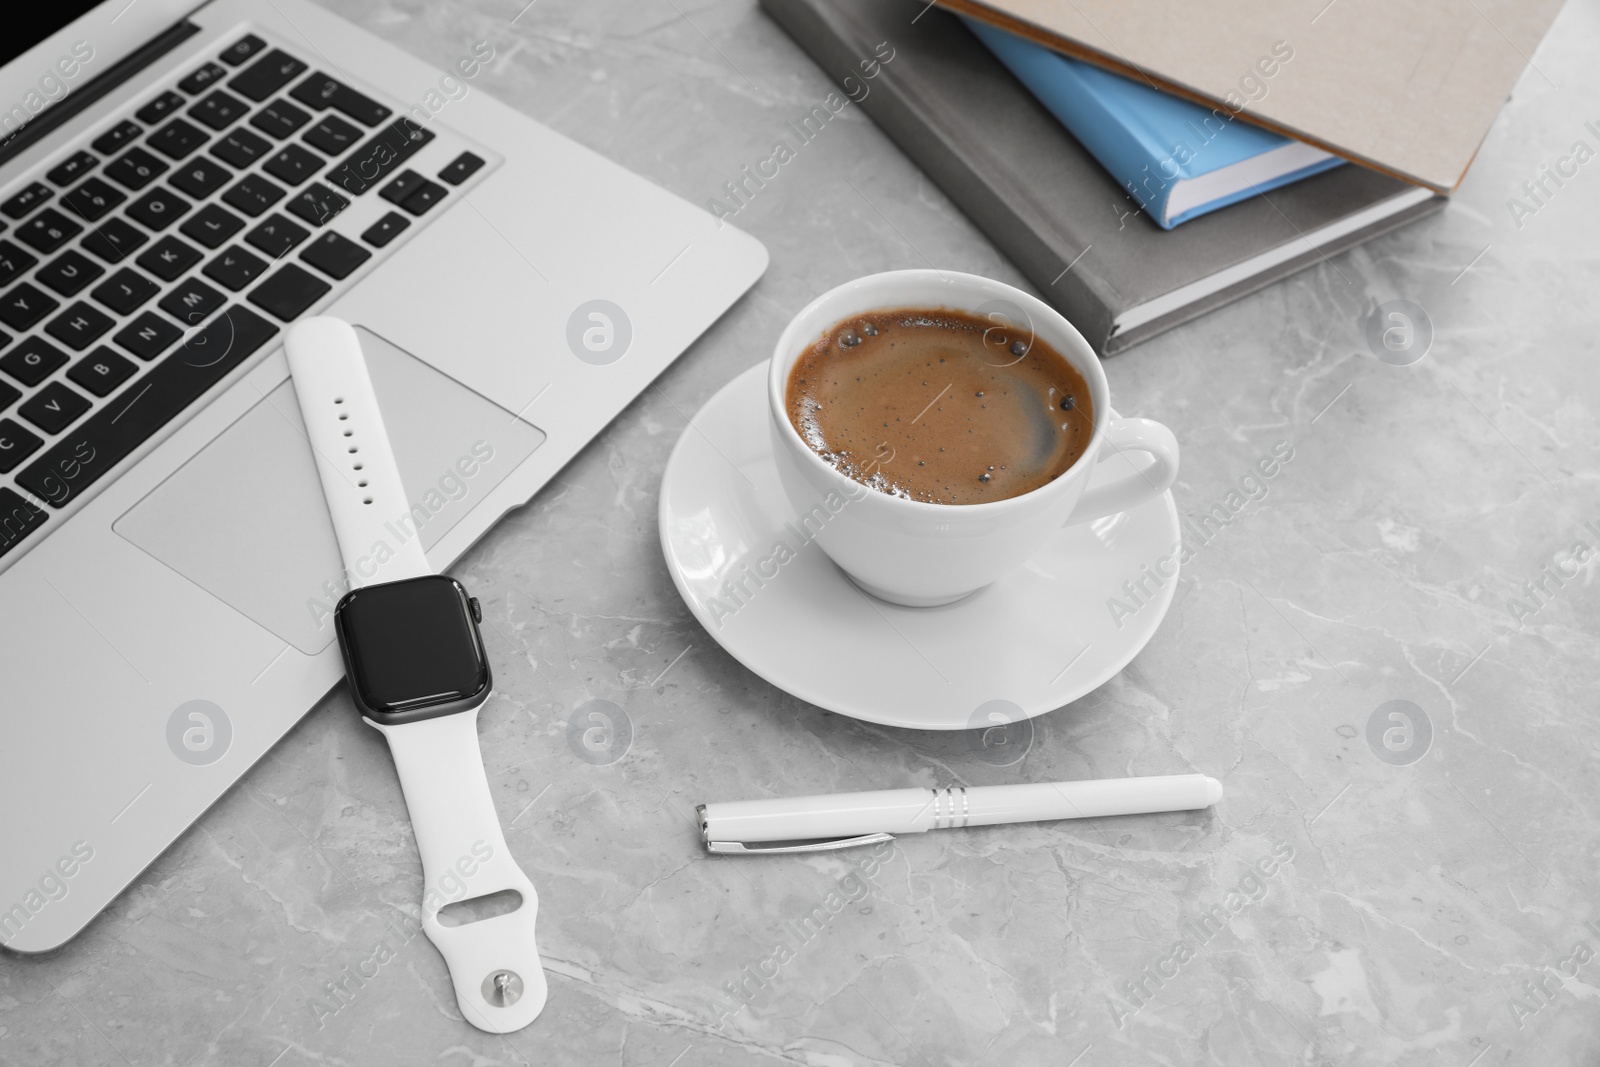 Image of Stylish smart watch, laptop and cup of coffee on grey marble table